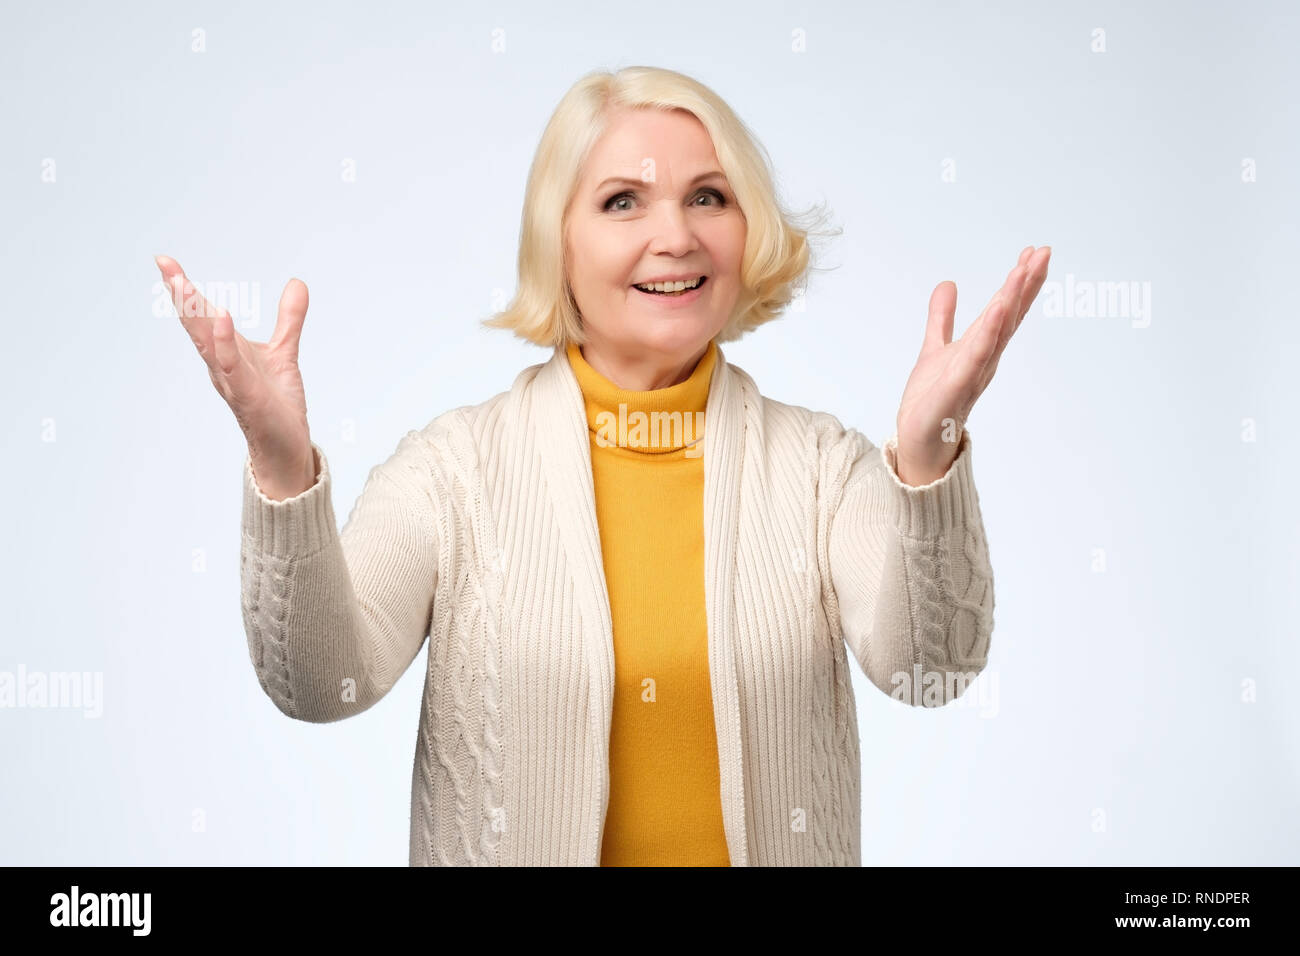 Old adult blonde excited cheerful astonished lady smiling, laughing Stock Photo